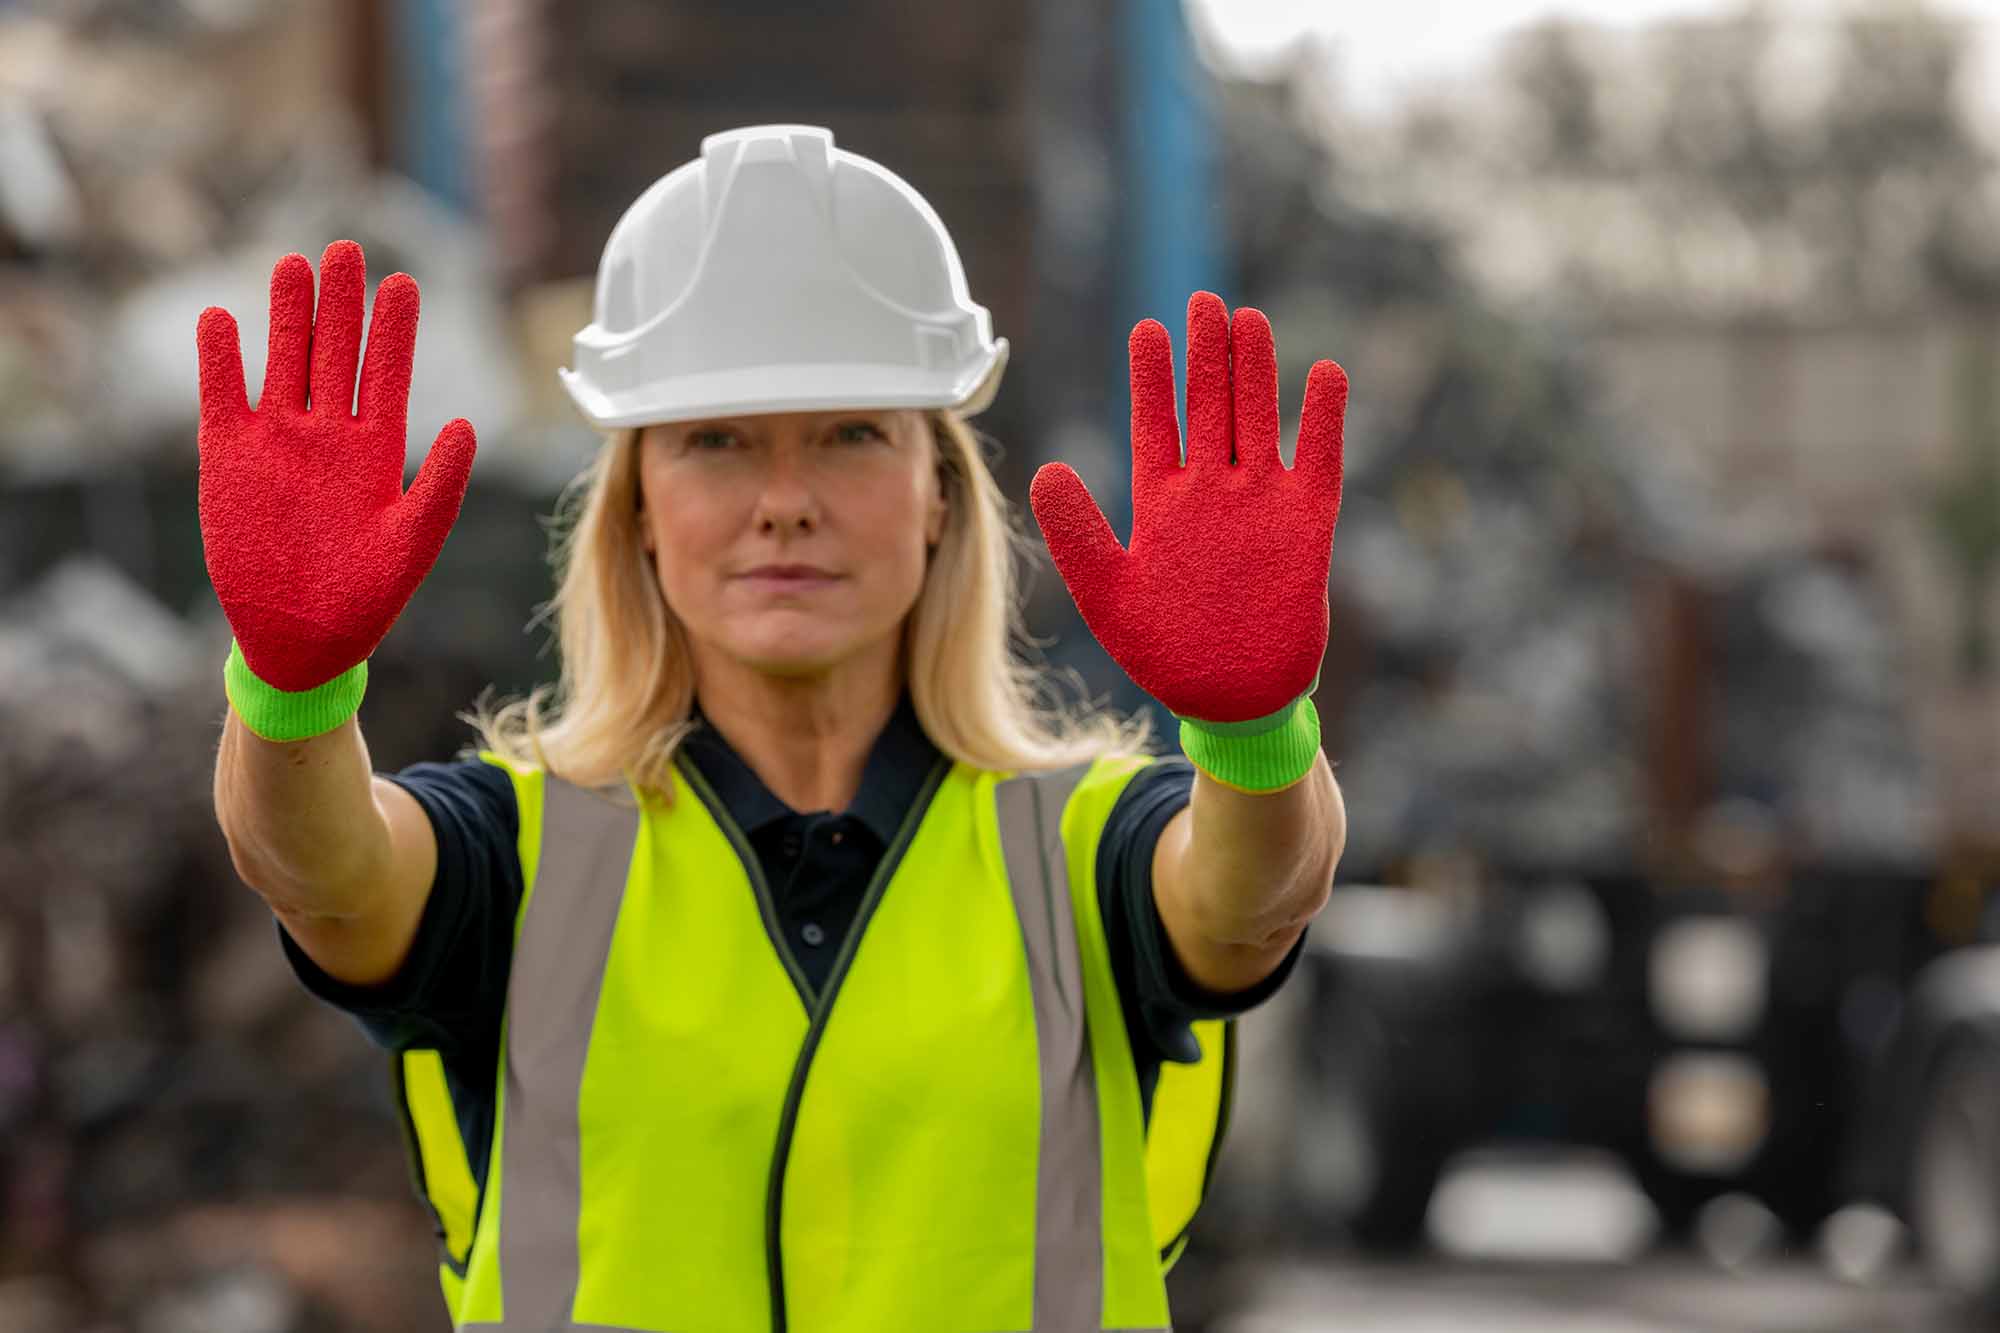 What Are The Main Causes of Injury for Construction Workers? 